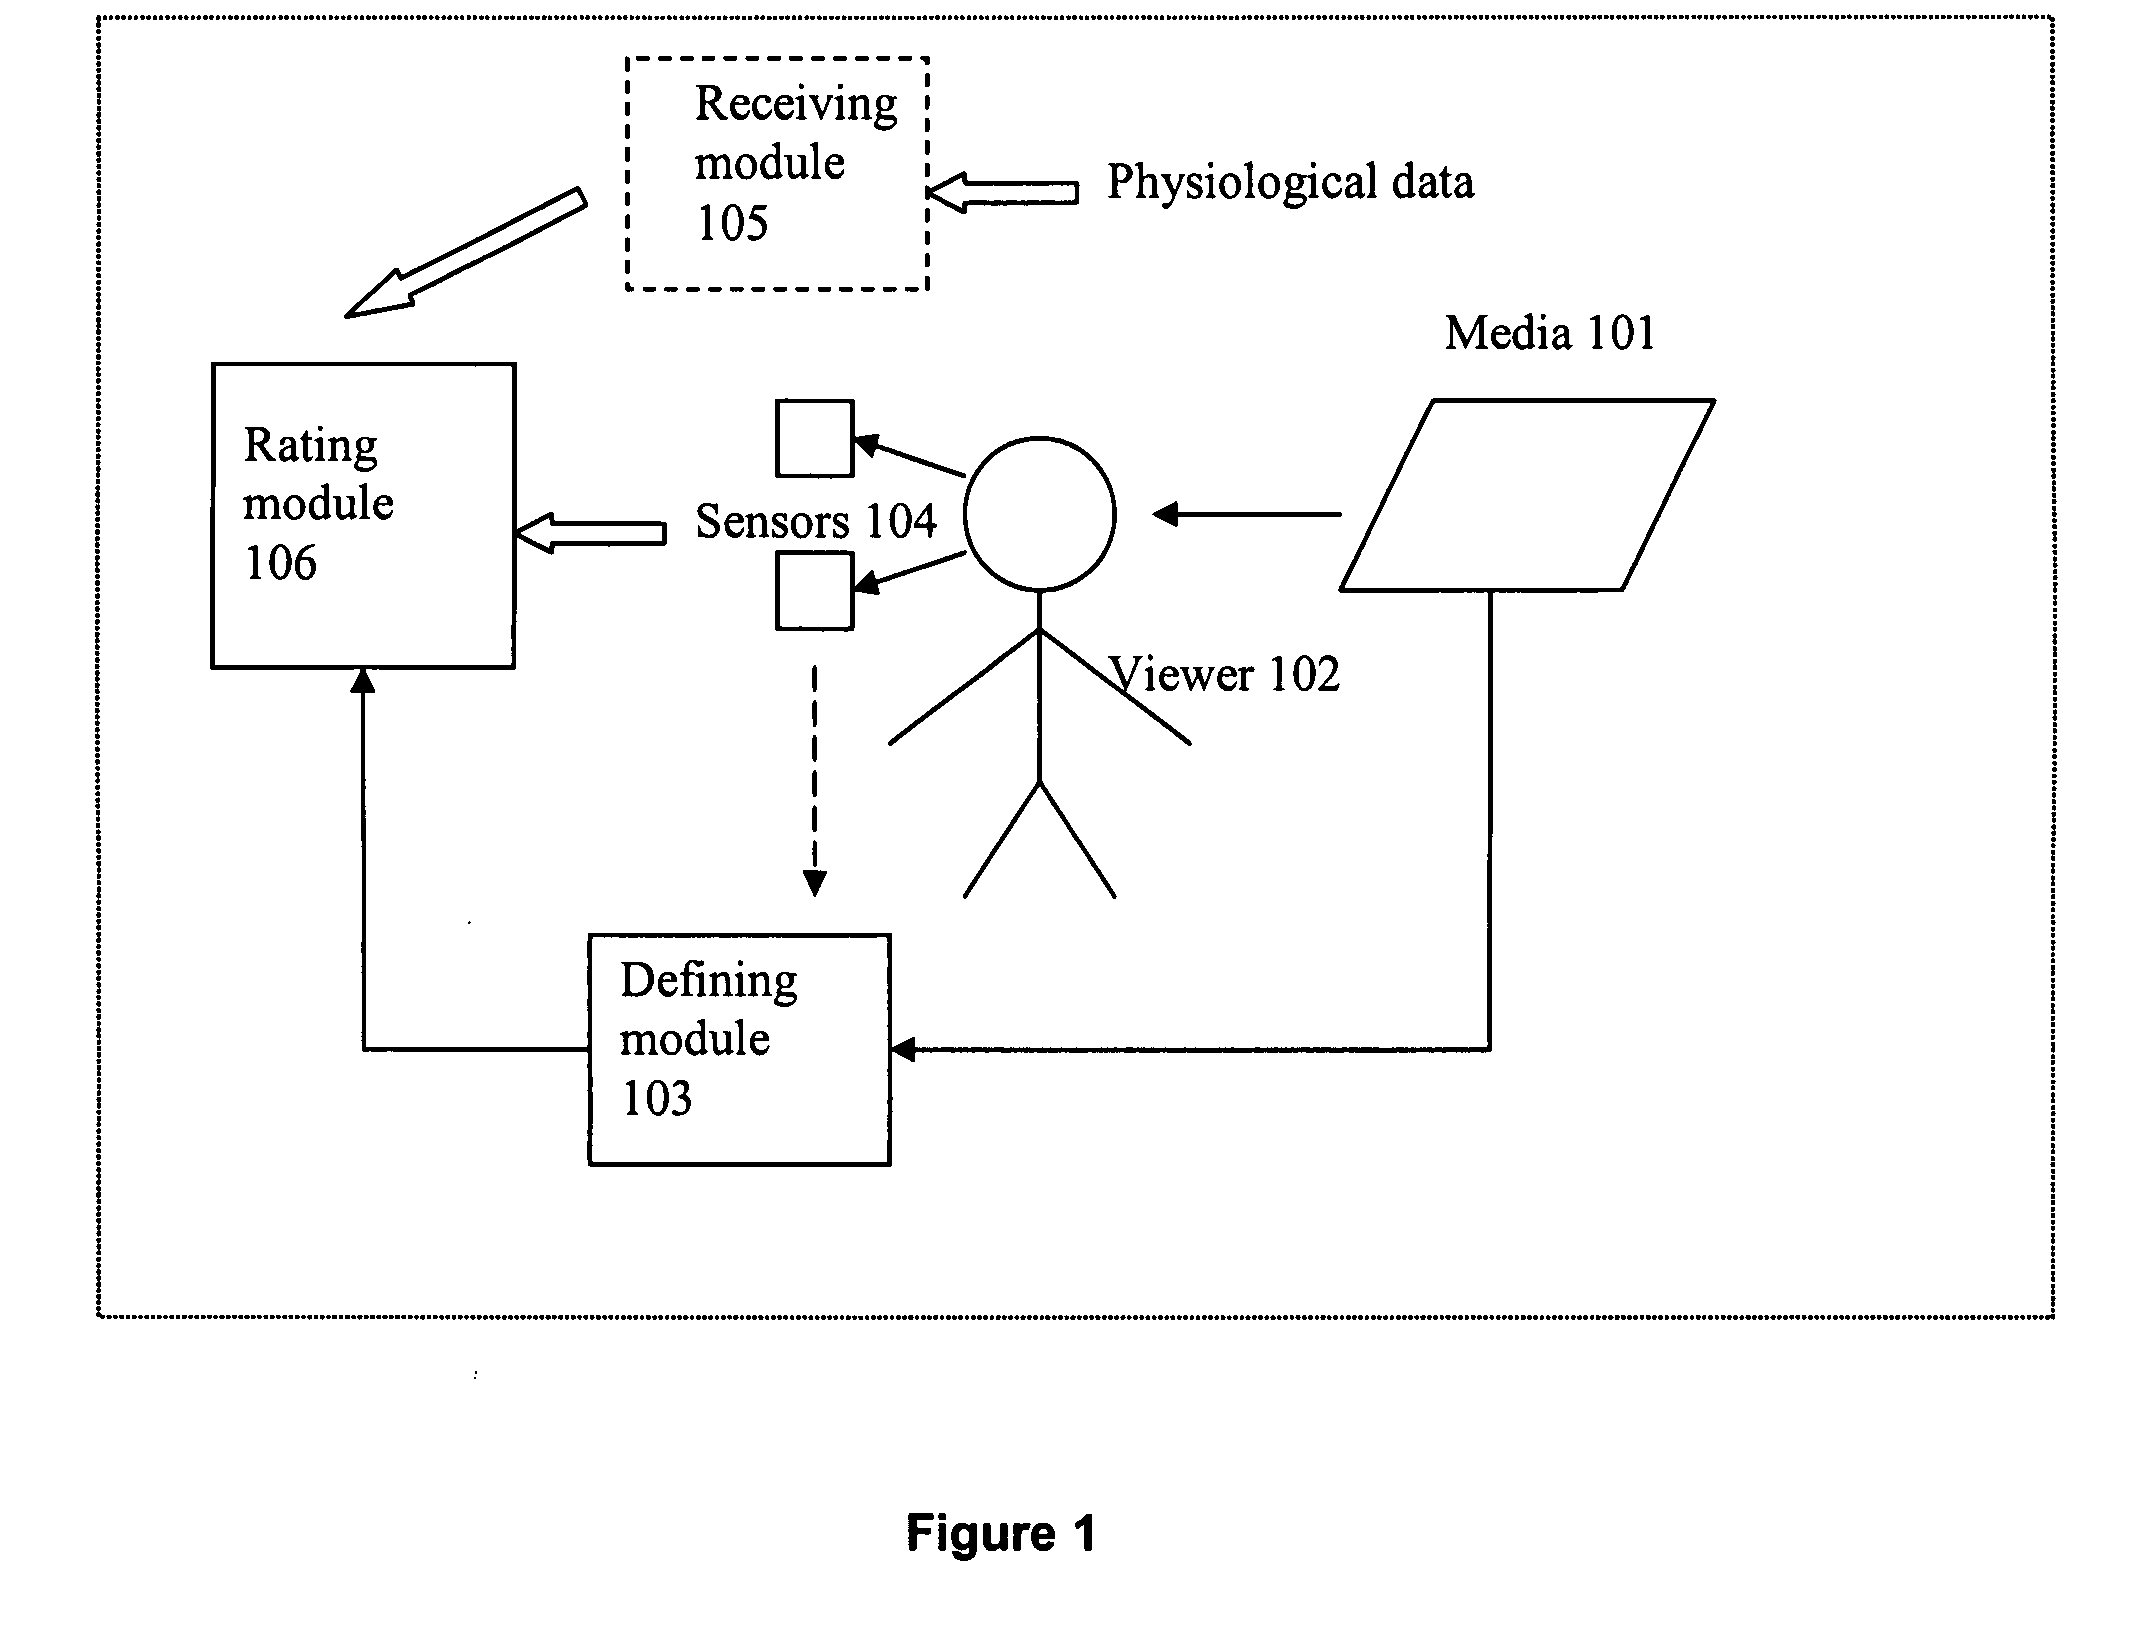 Method and system for rating media and events in media based on physiological data